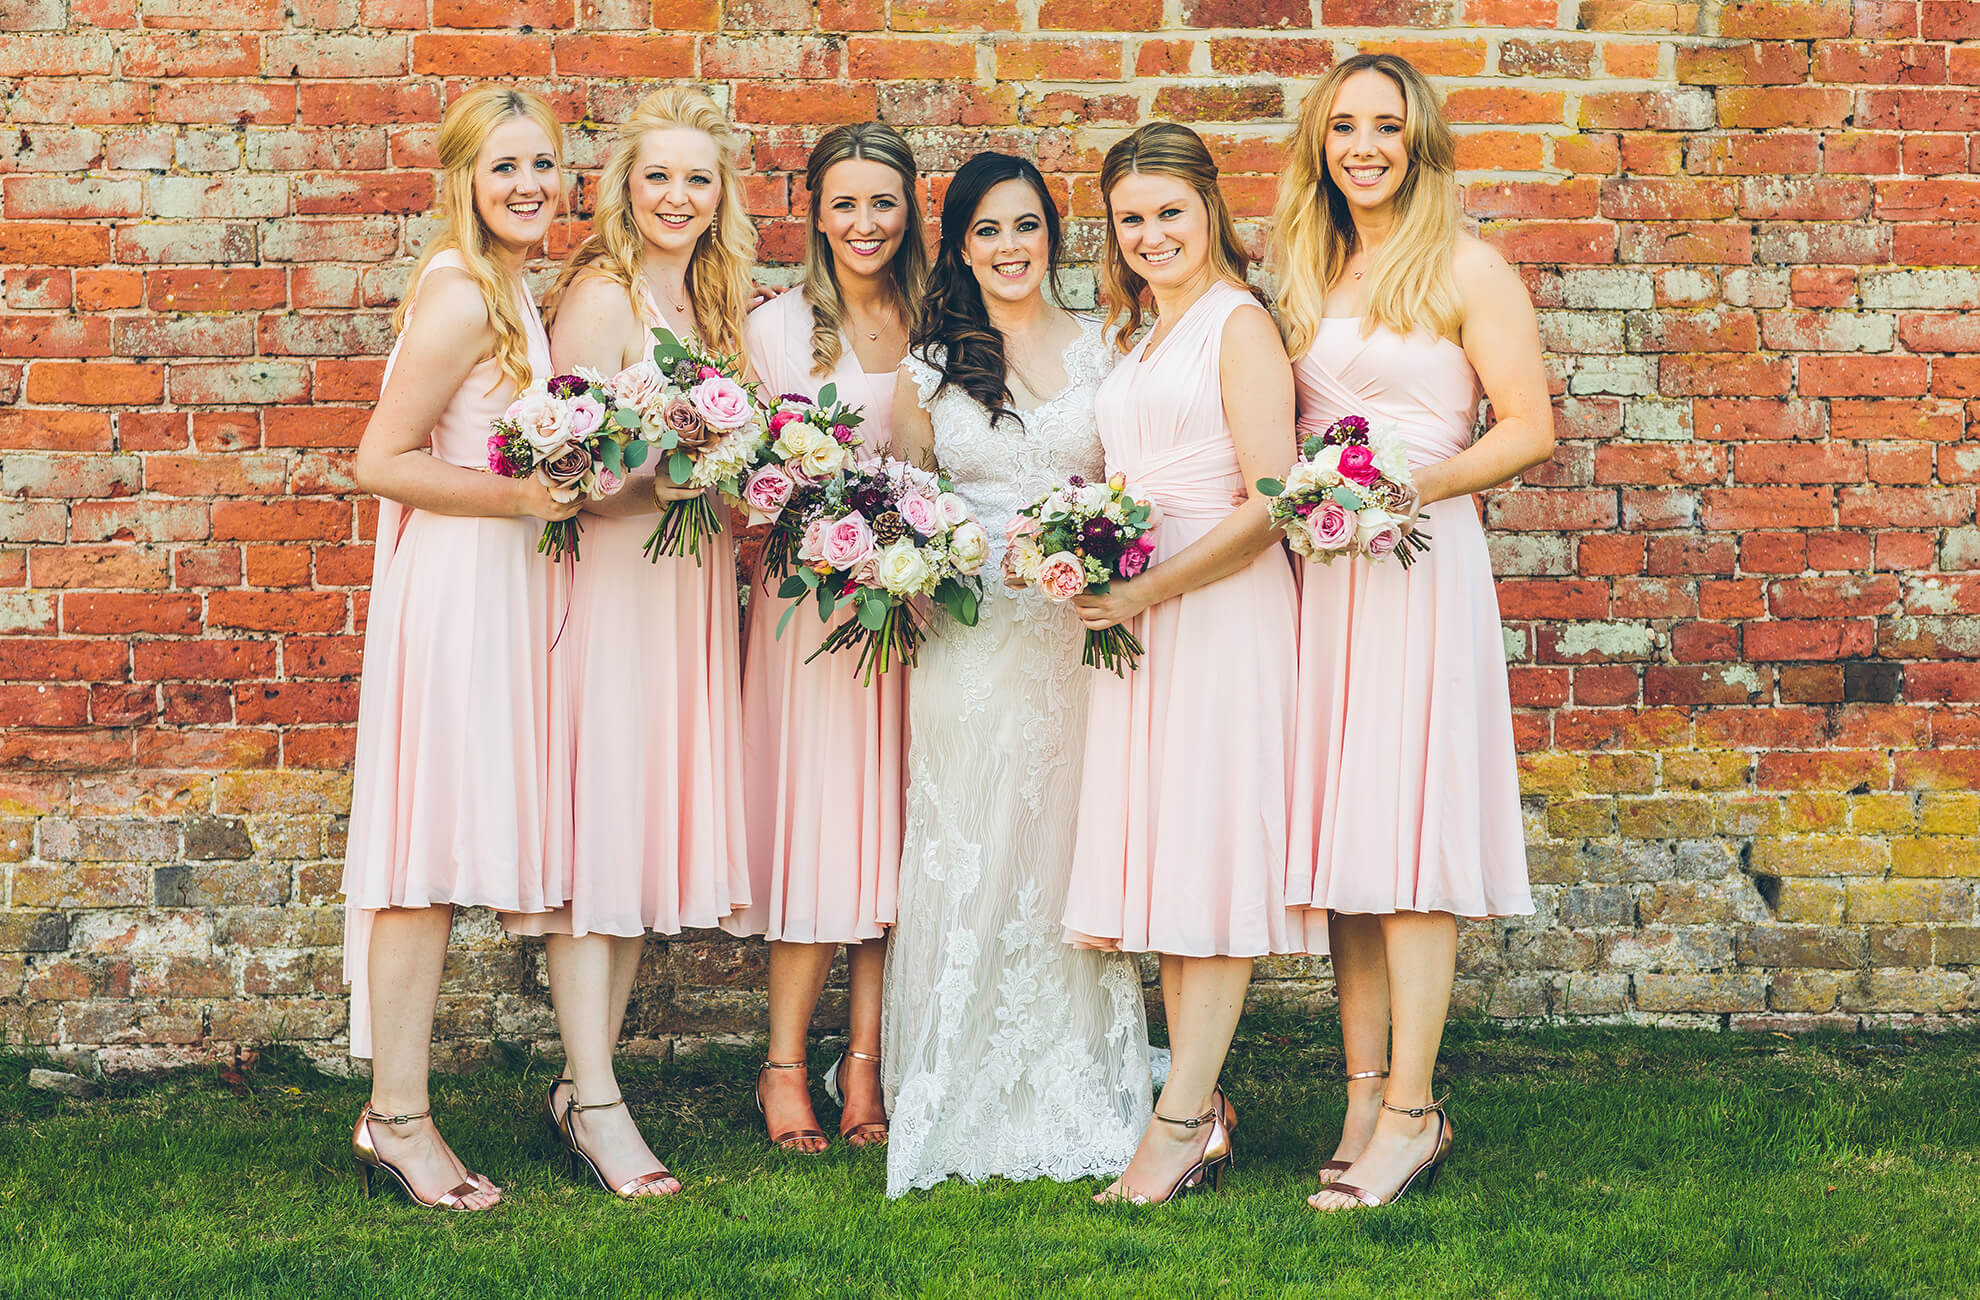 Bridesmaids look stunning in knee-length pastel pink bridesmaids dresses as they join the bride at Combermere Abbey